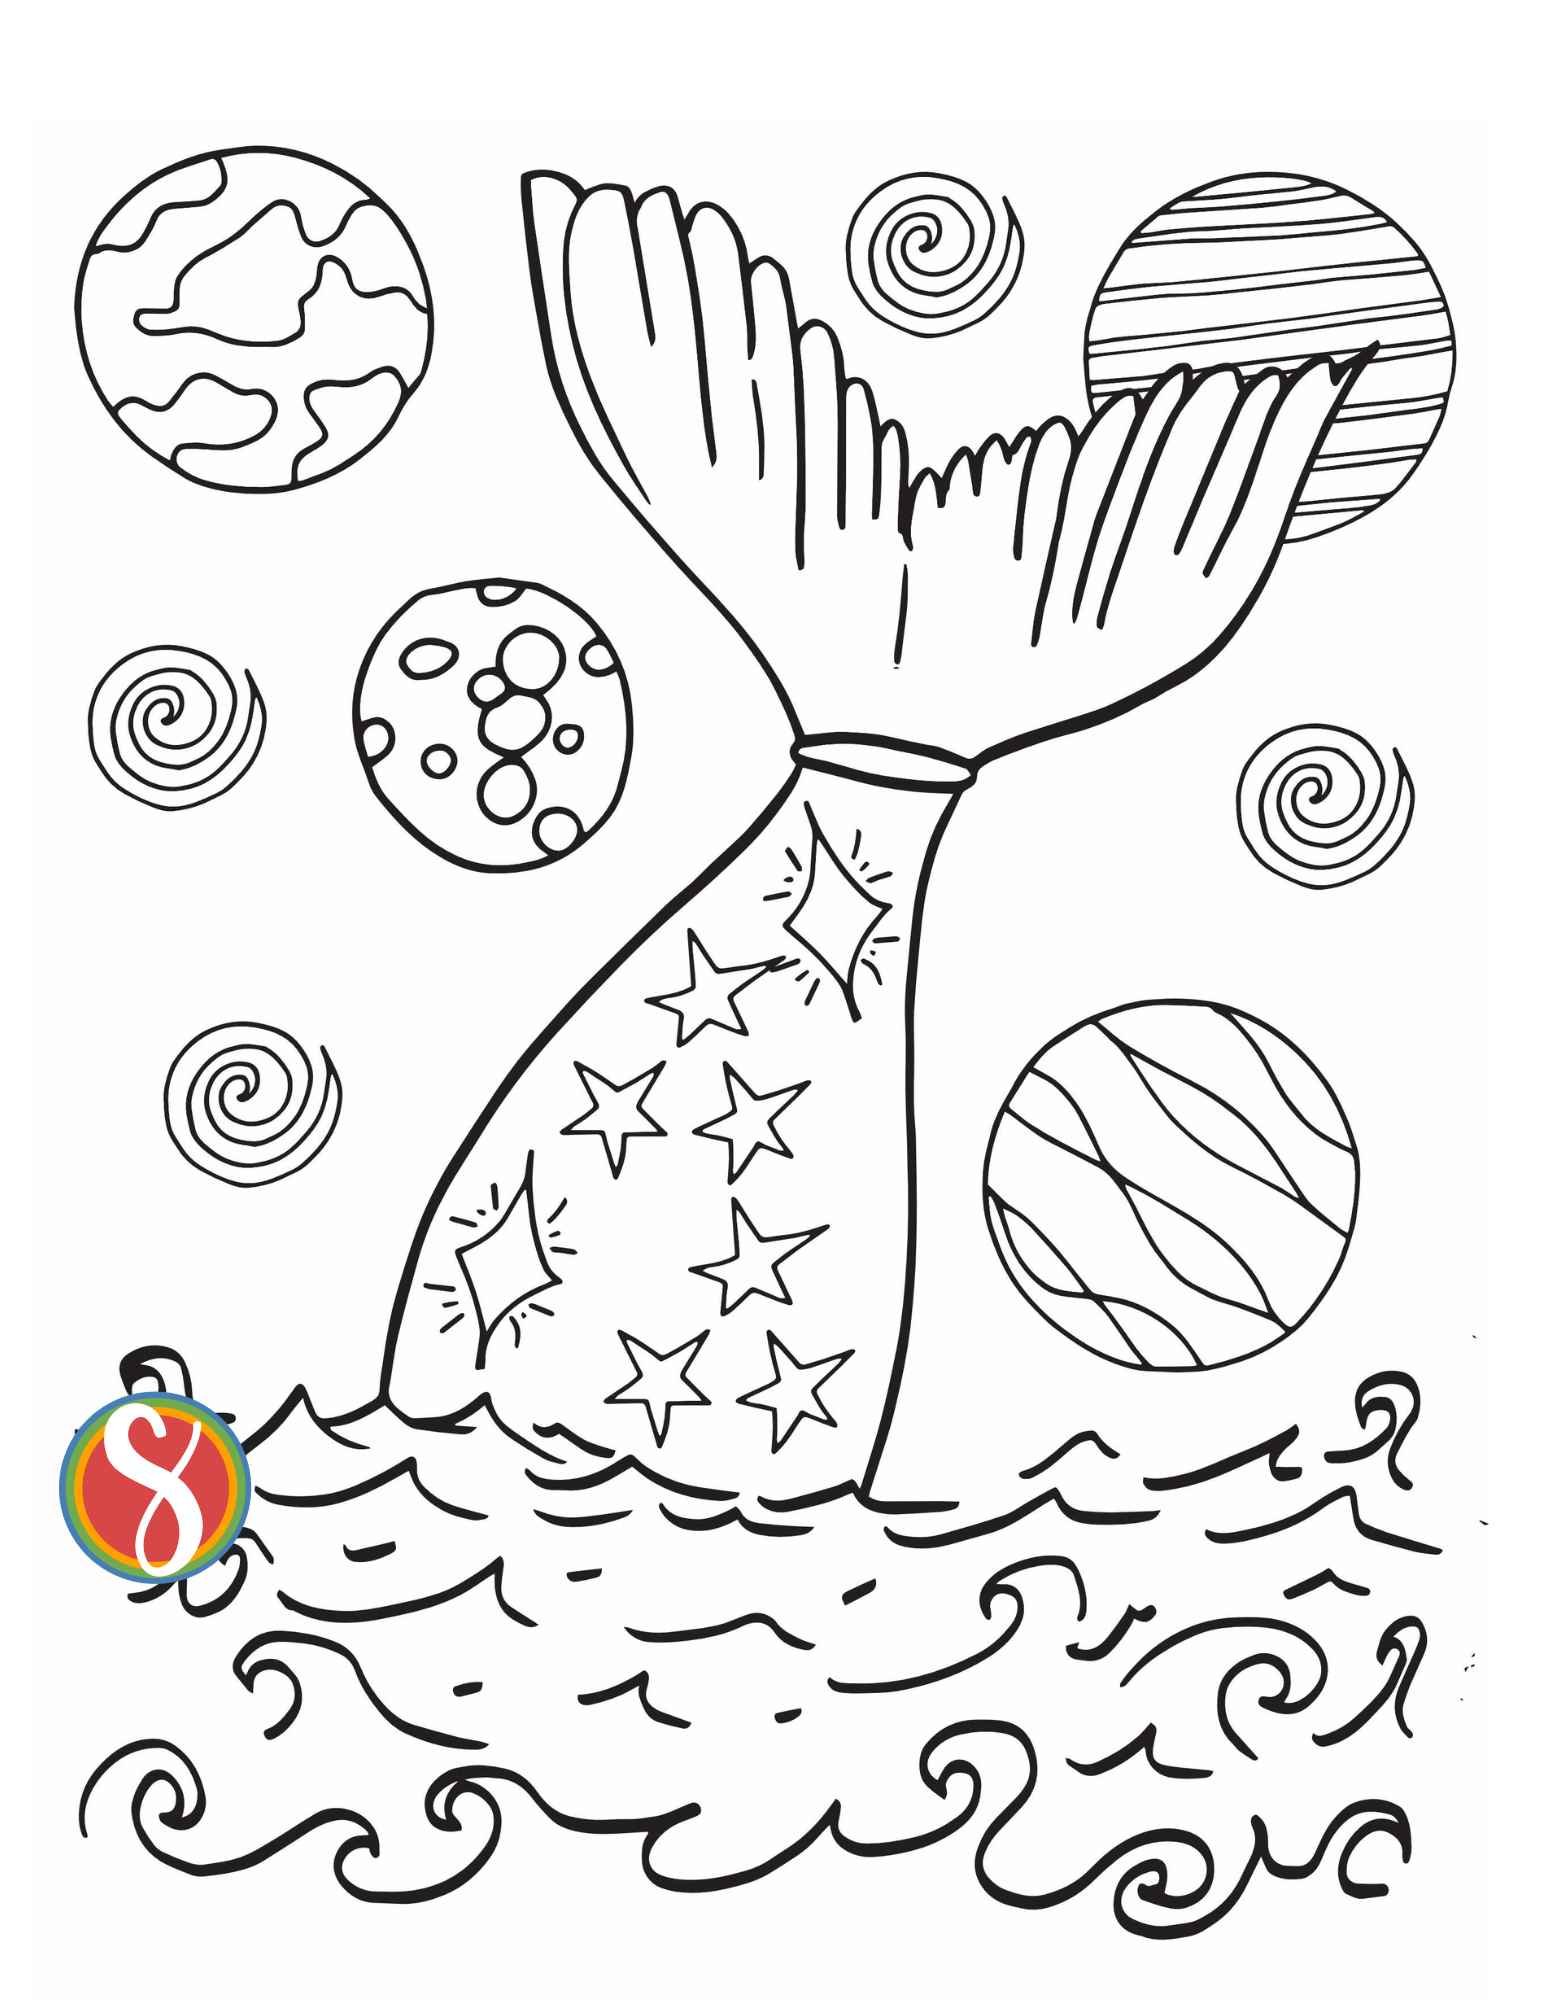 A mermaid tail outline full of colorable diamond-shaped stars with a background of different planets to color